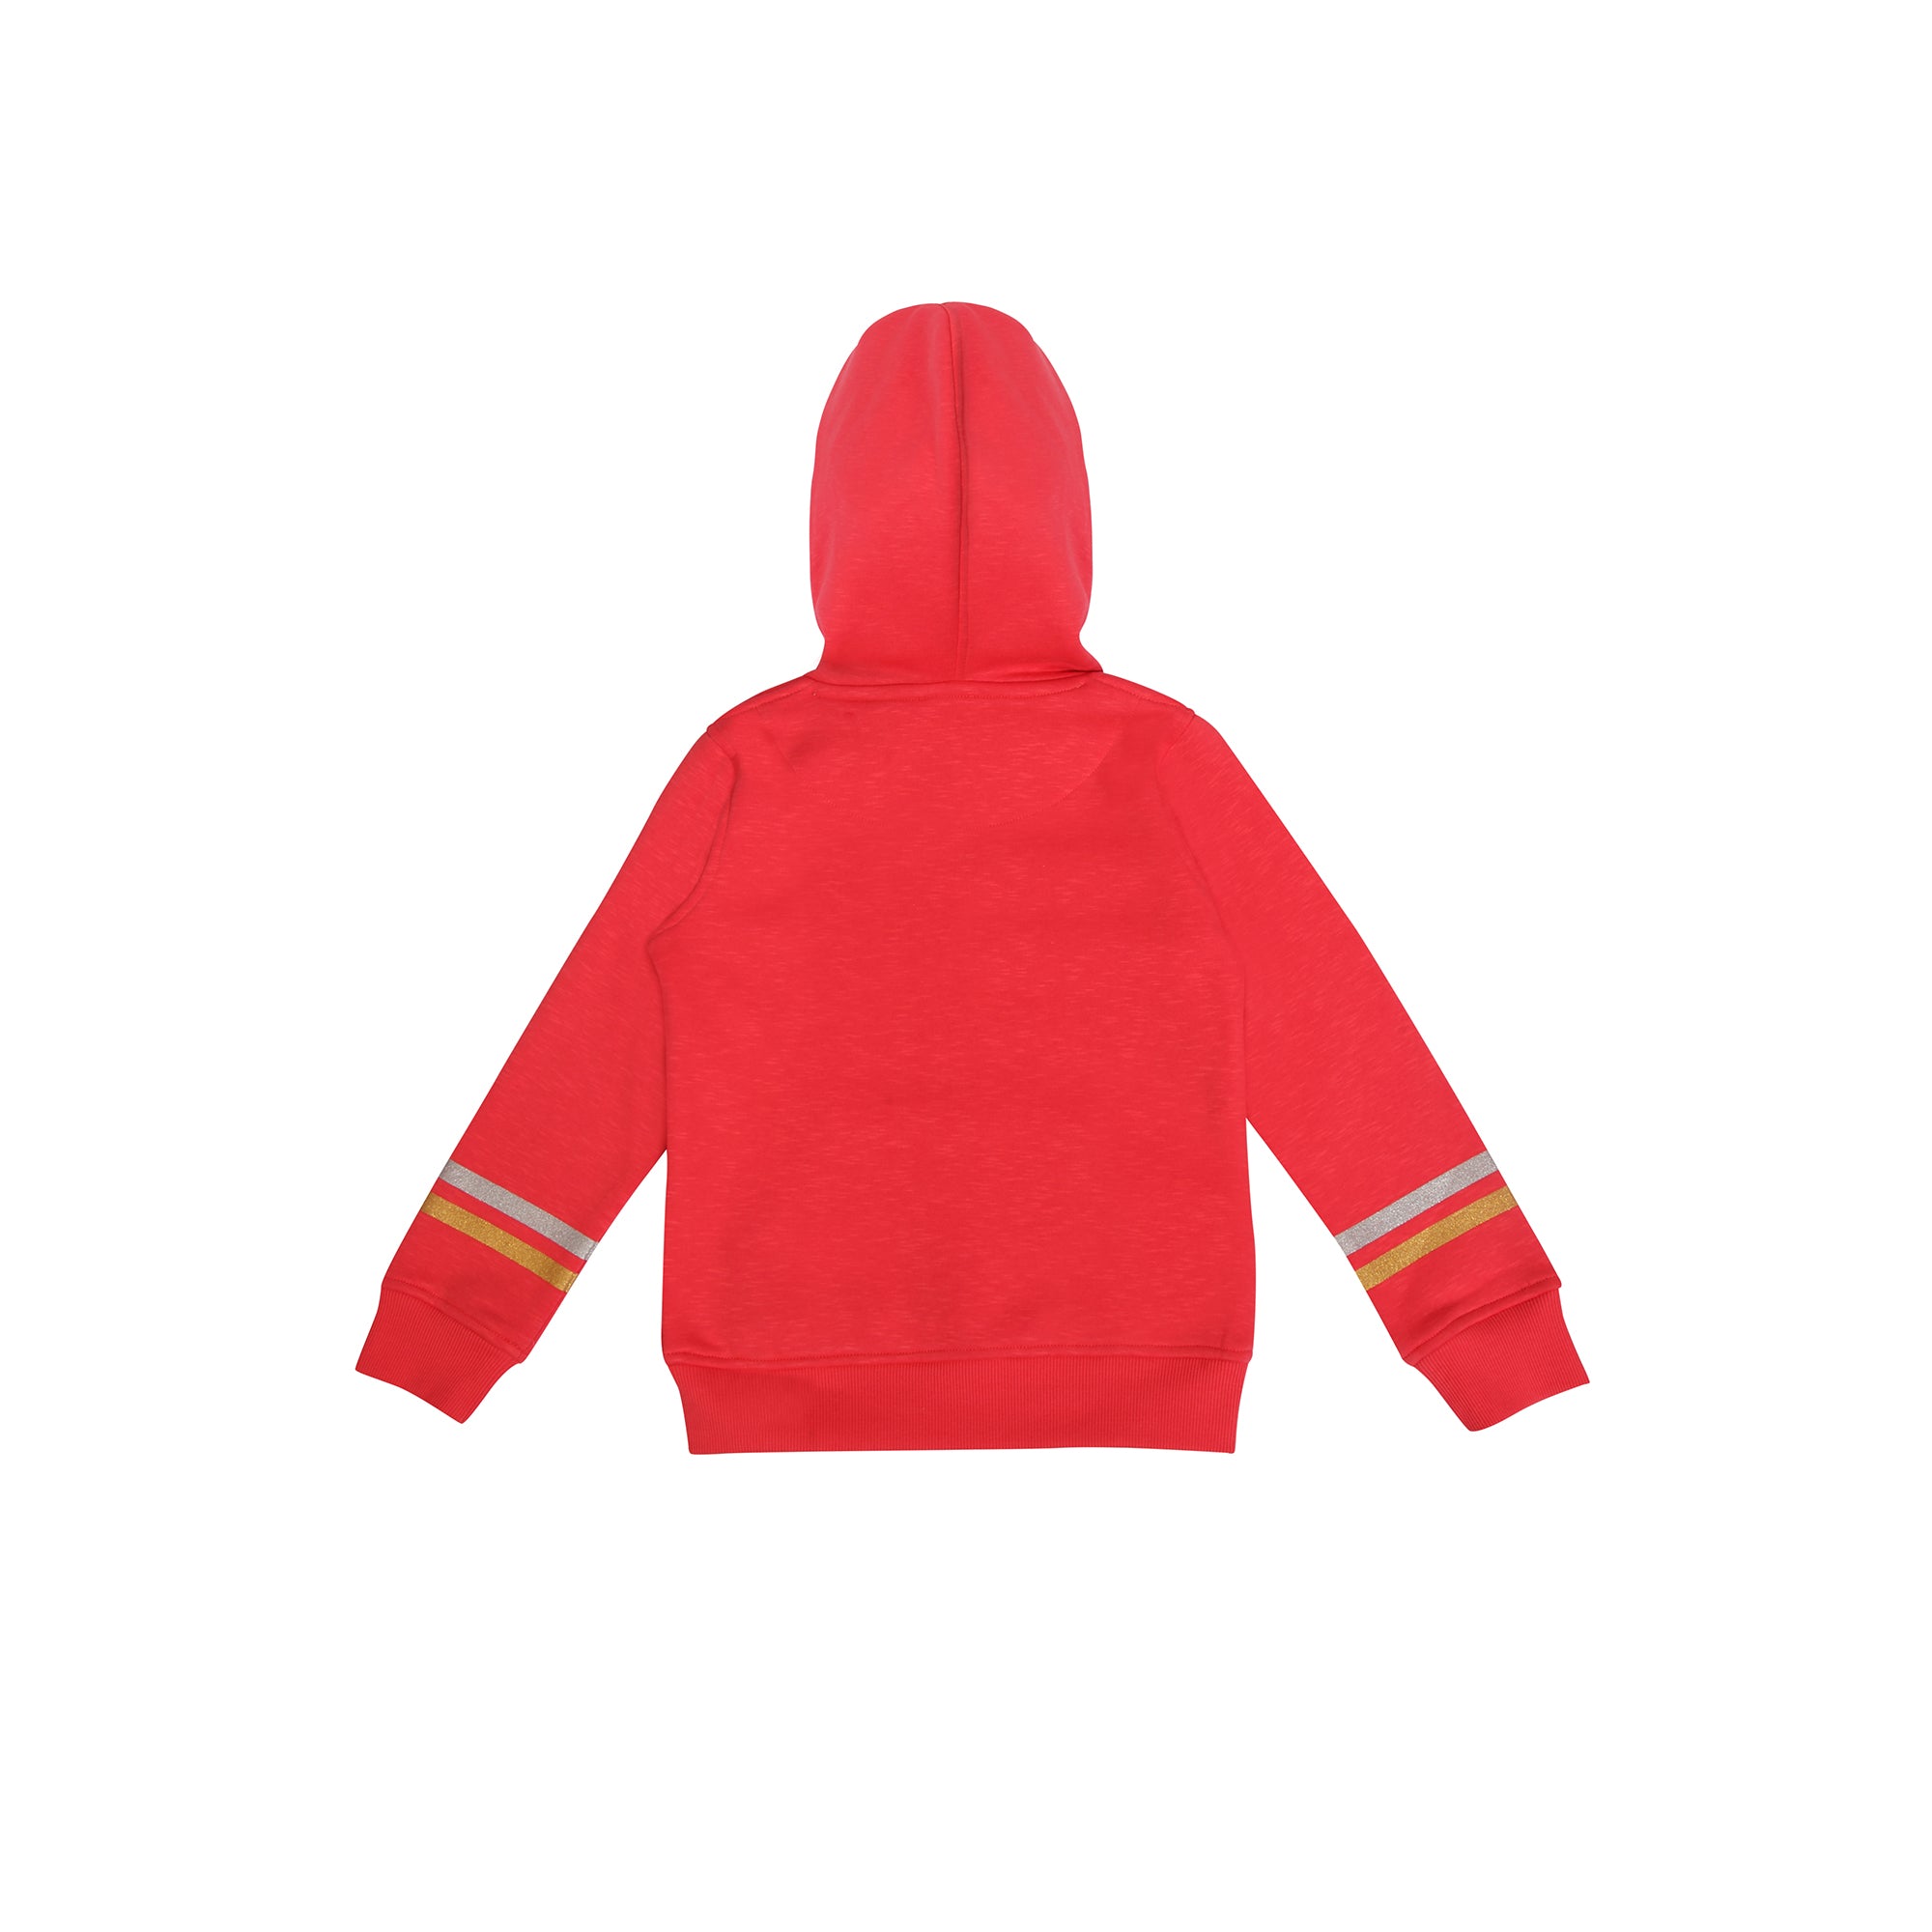 Paris Hoodie In Tomato Red With Front Pockets